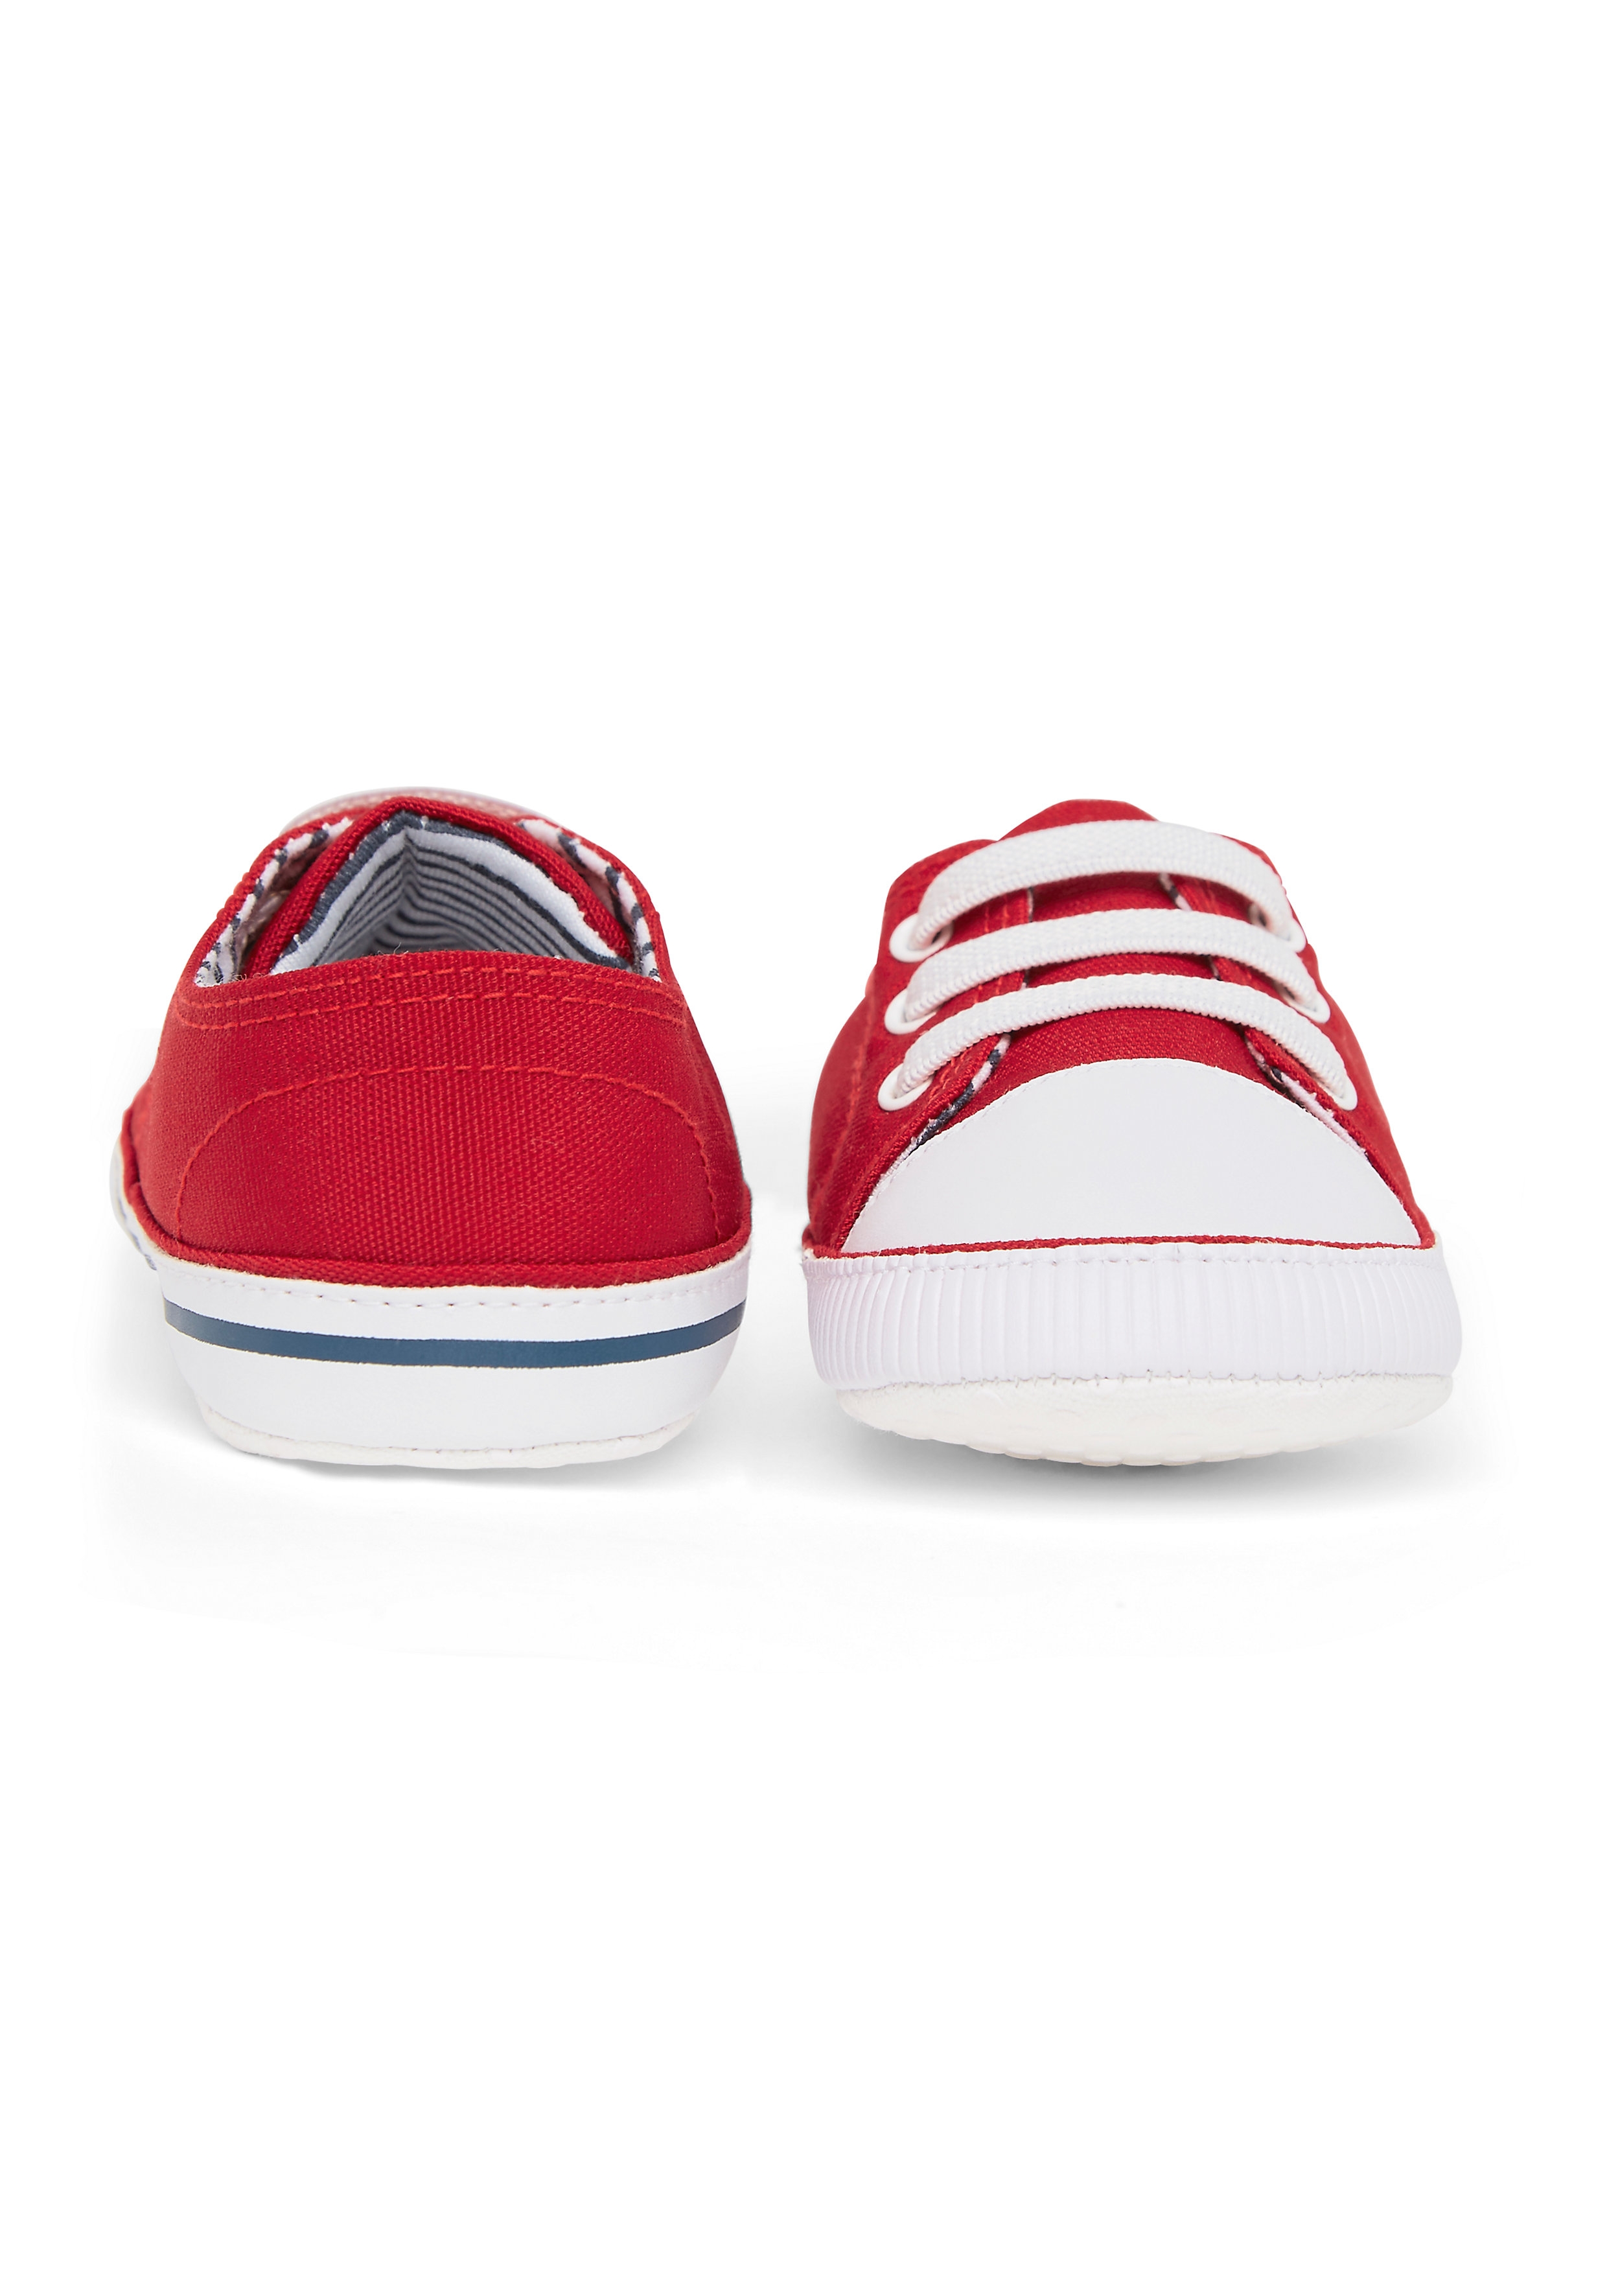 Mothercare | Boys Red Canvas Pram Shoes 1